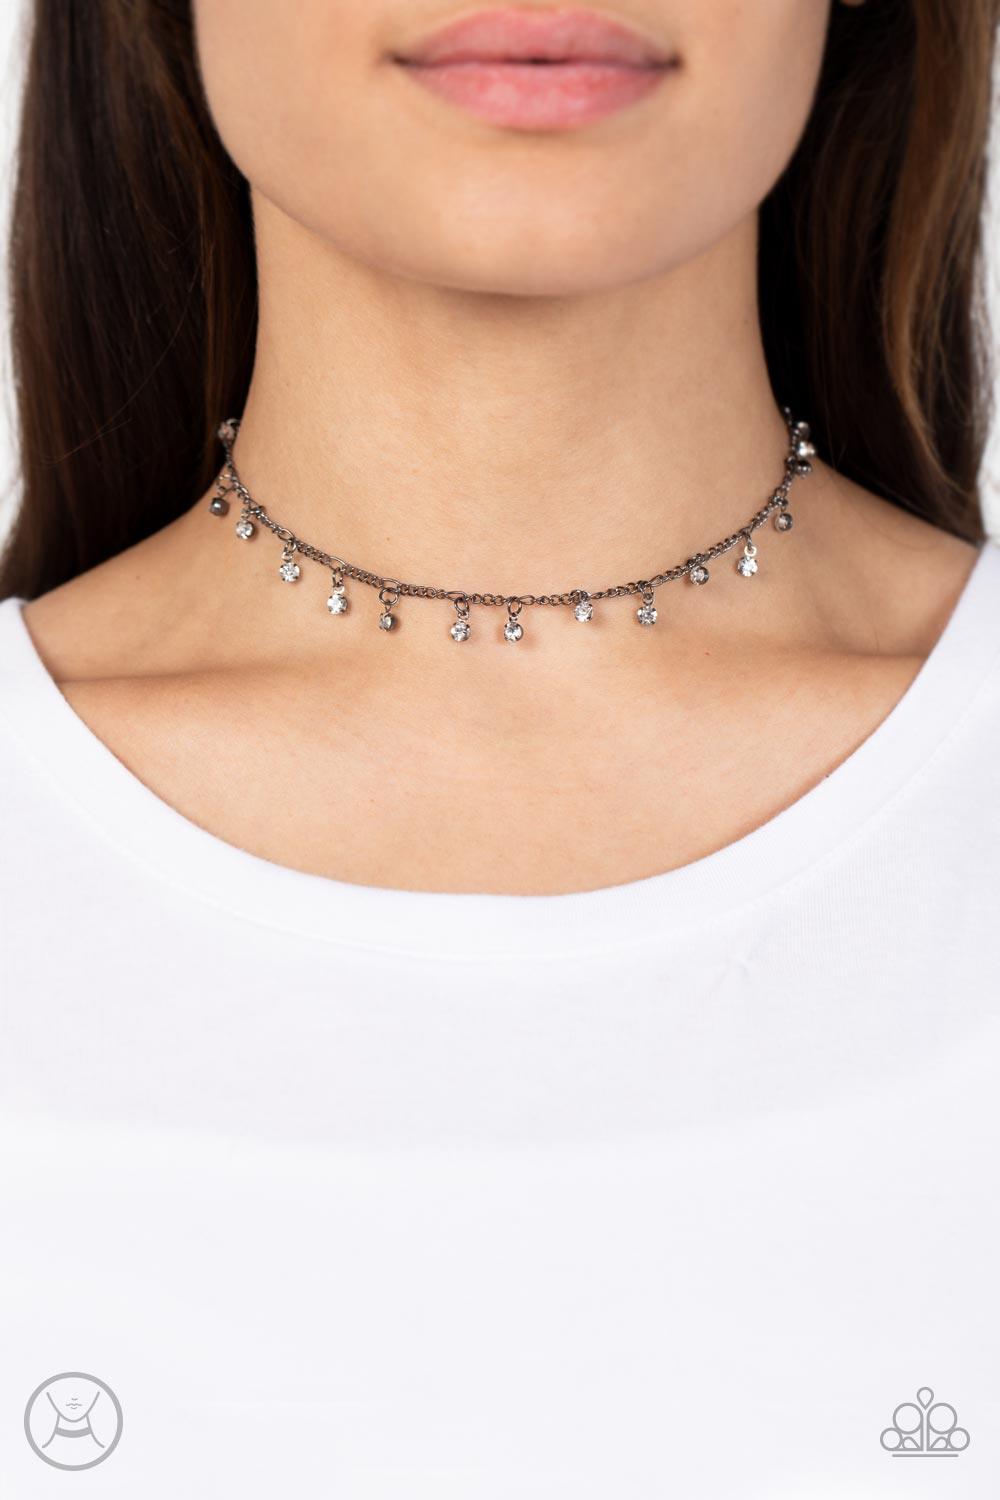 Paparazzi Accessories Bringing SPARKLE Back - Black Encased in gritty gunmetal fittings, glassy white rhinestones dance from the bottom of a dainty gunmetal chain for a dash of spell-binding radiance around the neck. Sold as one individual choker necklace